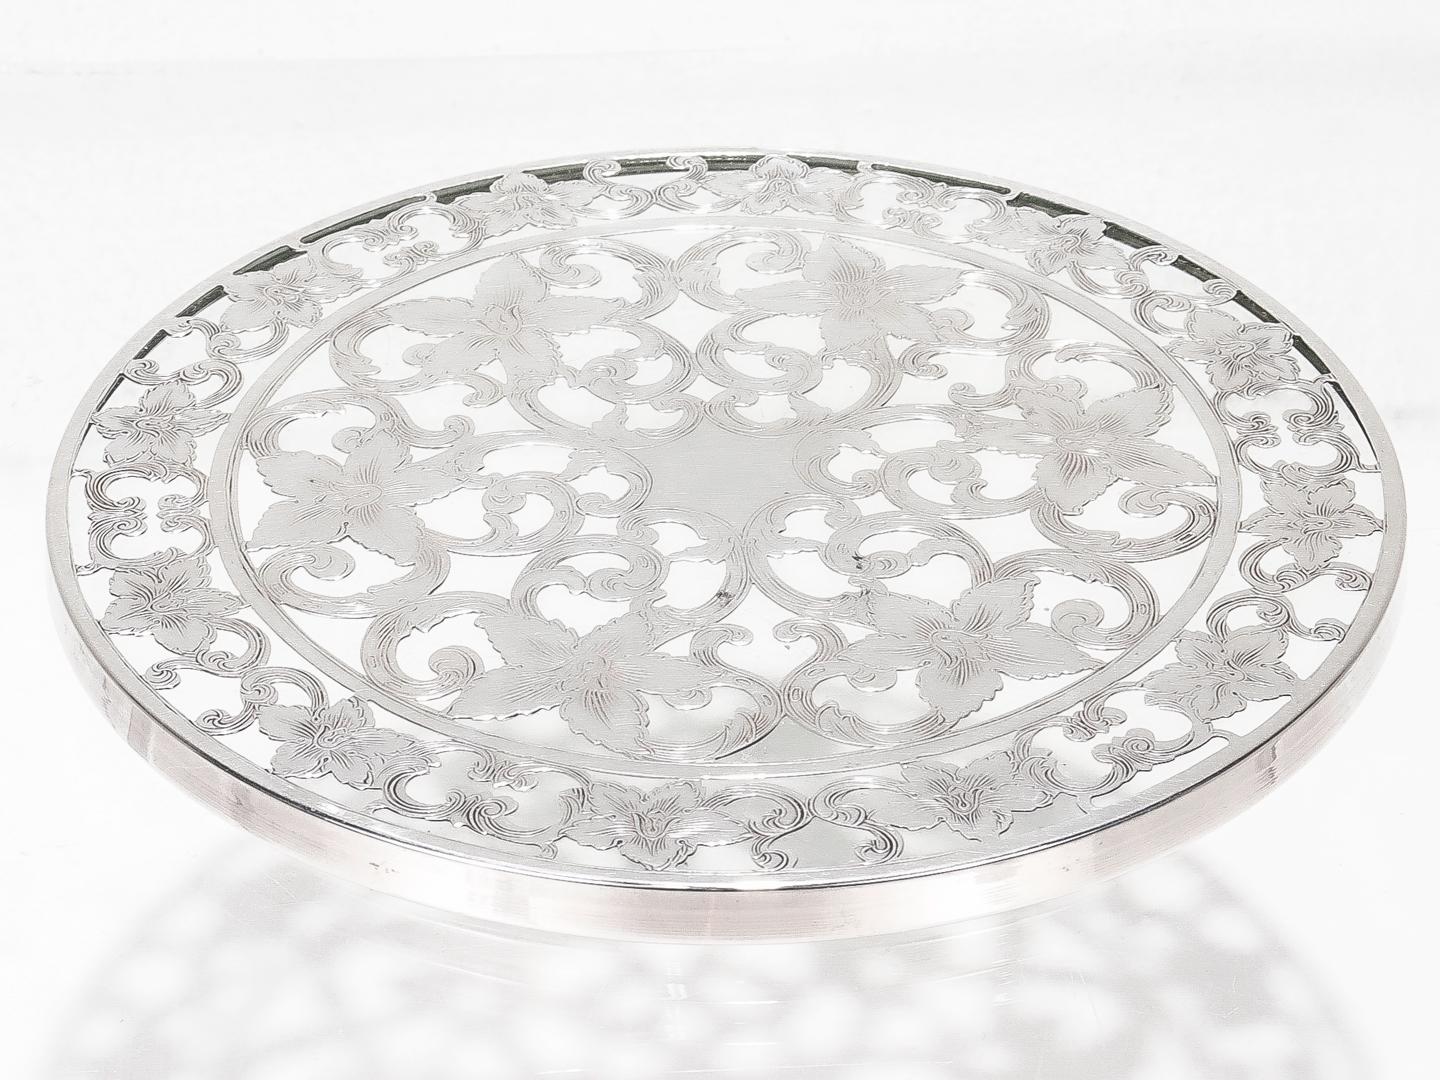 A fine antique wine trivet.

With a thick sterling silver overlay in a floral pattern on a glass base.

Struck to the side of the rim: STERLING.

Simply a wonderful coaster or trivet!

Date:
Early 20th Century

Overall Condition:
It is in overall